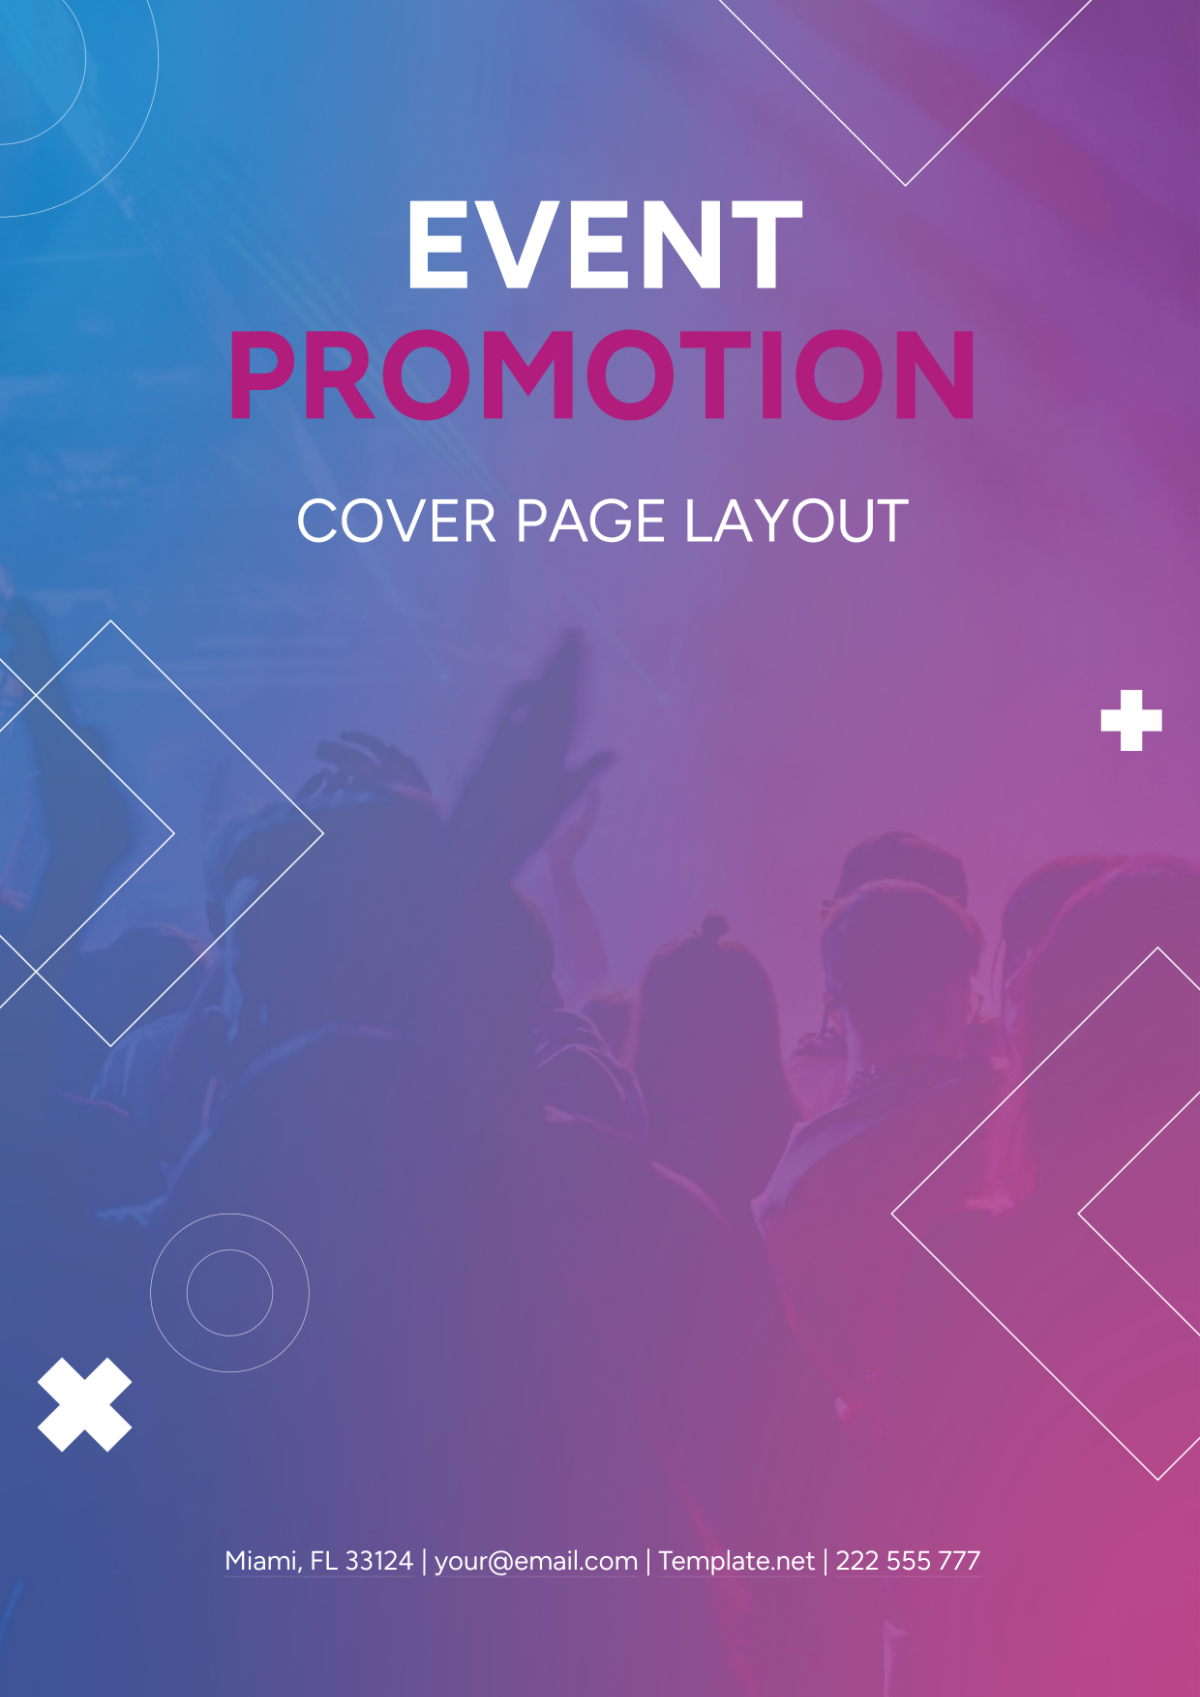 Event Promotion Cover Page Layout Template